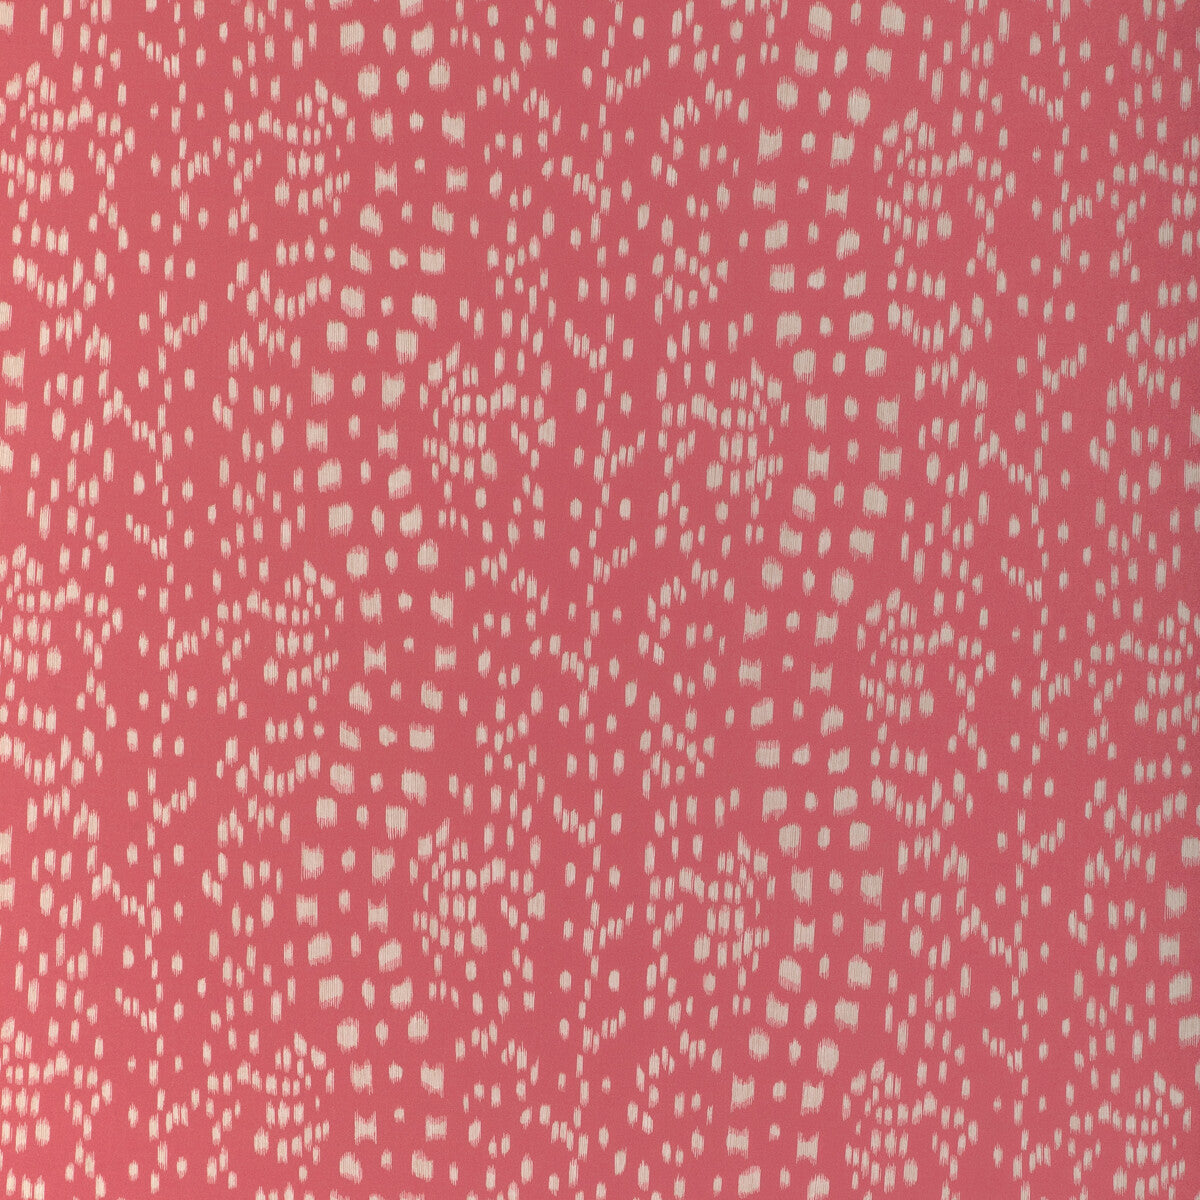 Les Touches Reverse fabric in pink color - pattern 8024103.7.0 - by Brunschwig &amp; Fils in the La Menagerie collection